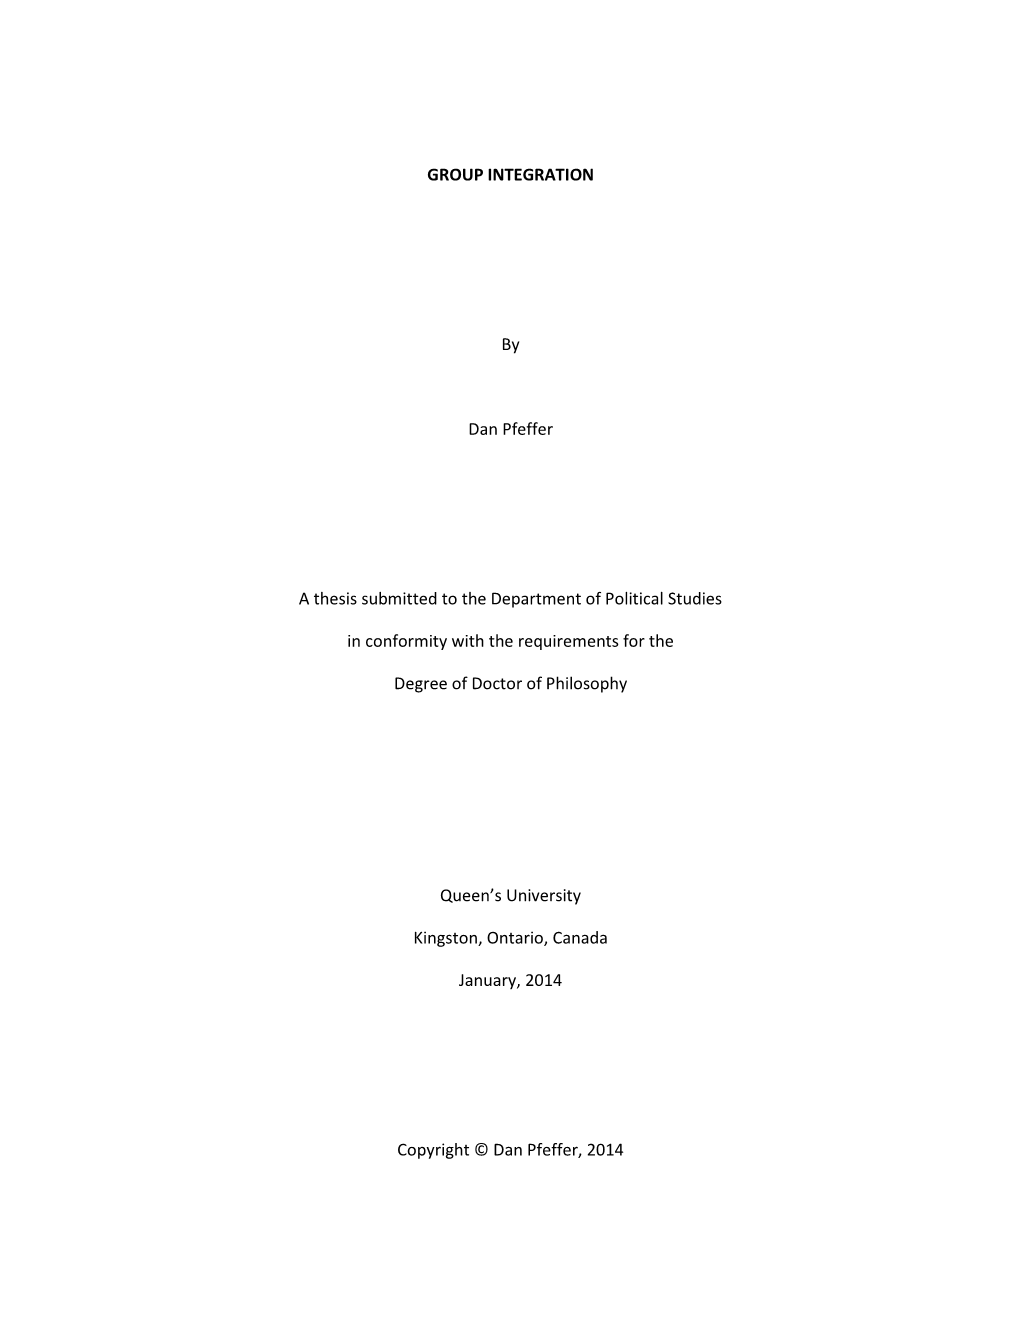 GROUP INTEGRATION by Dan Pfeffer a Thesis Submitted to The